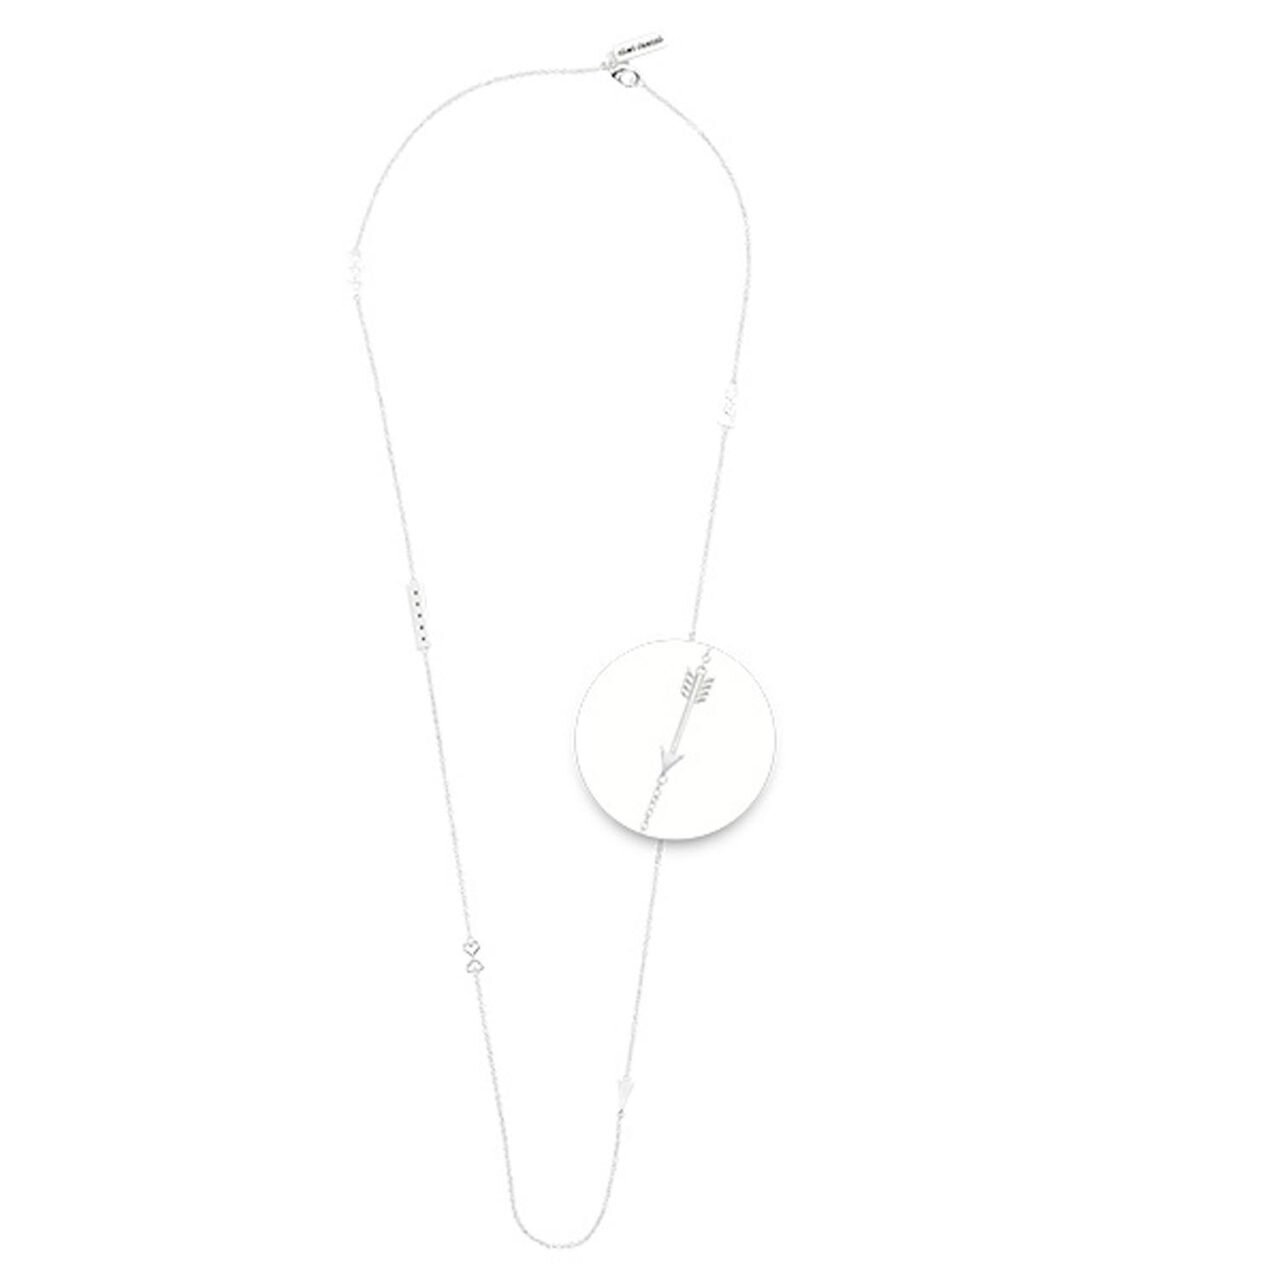 Nikki Lissoni Statement Silver-plated Necklace 60cm Compatible with Pendant N1031S60